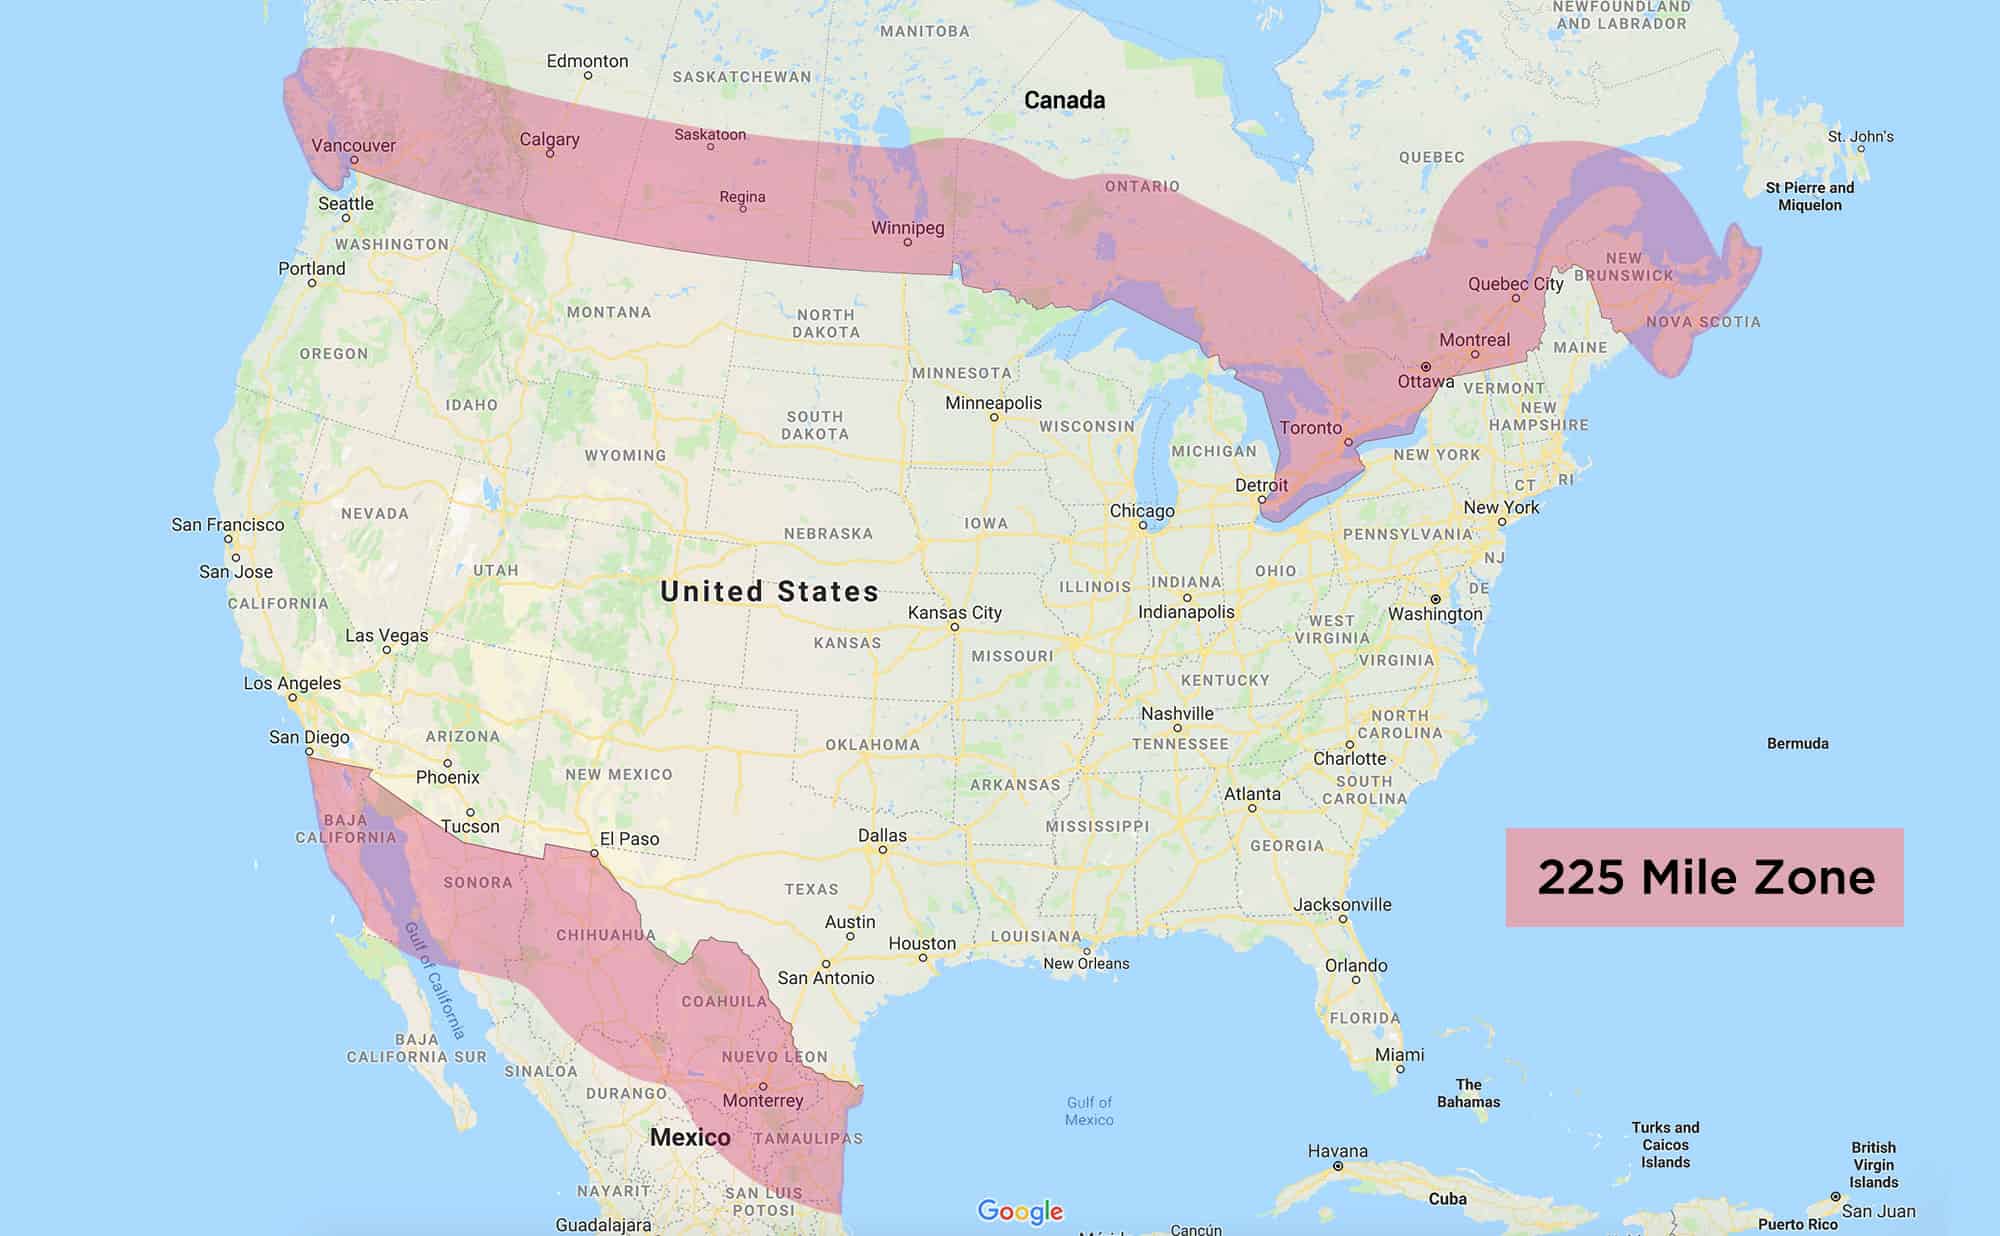 A map from the USA showing the 225 mile zone